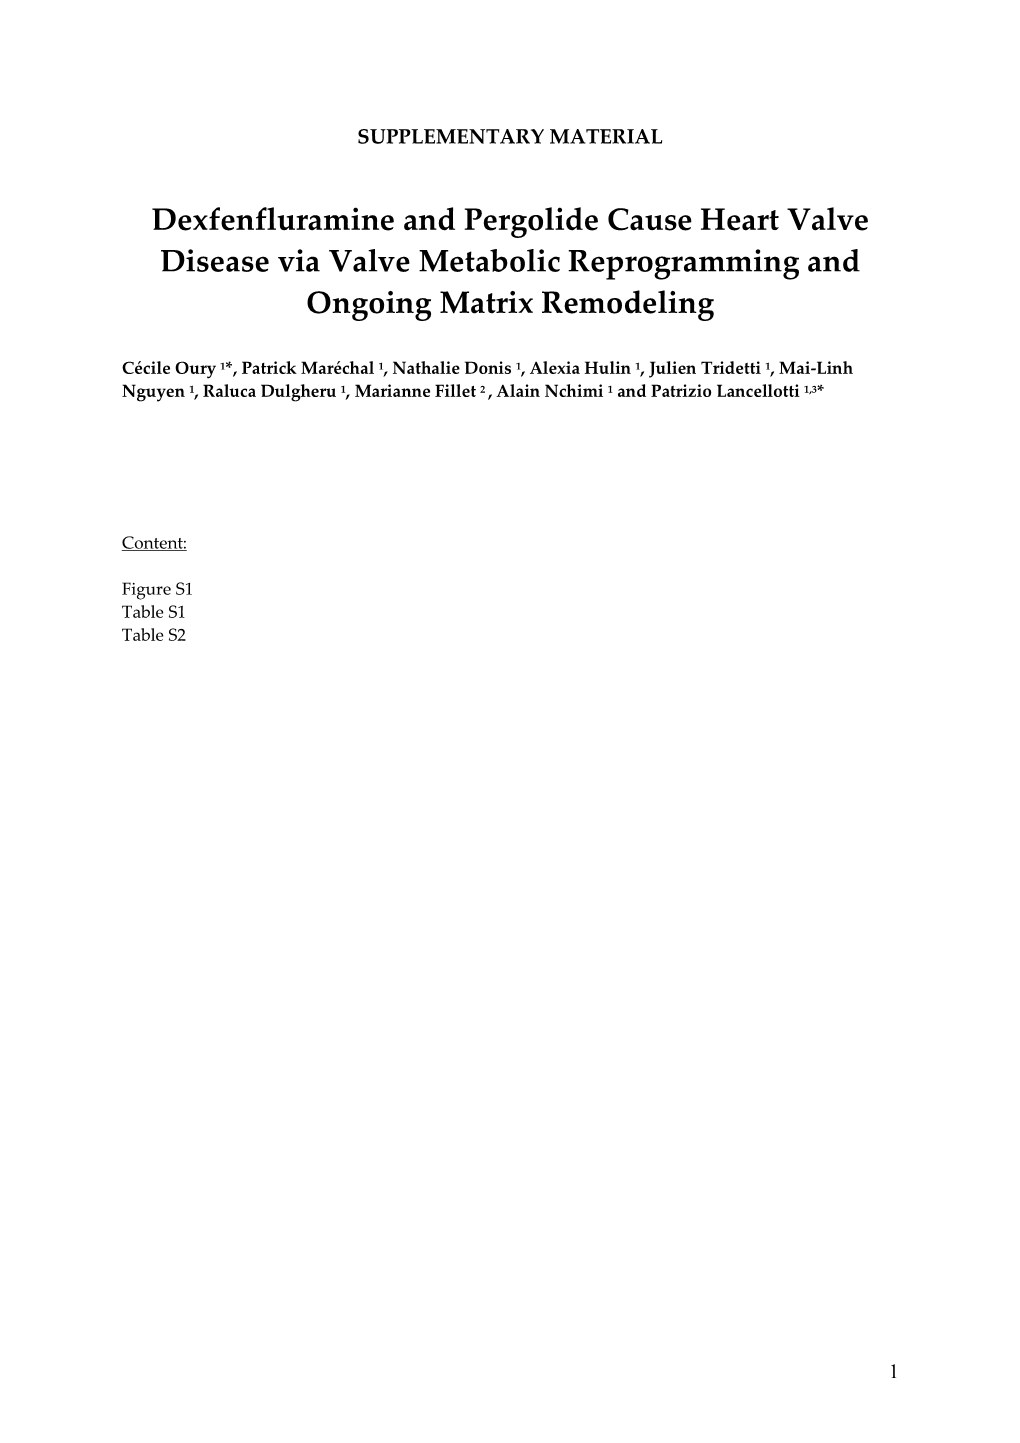 Dexfenfluramine and Pergolide Cause Heart Valve Disease Via Valve Metabolic Reprogramming and Ongoing Matrix Remodeling